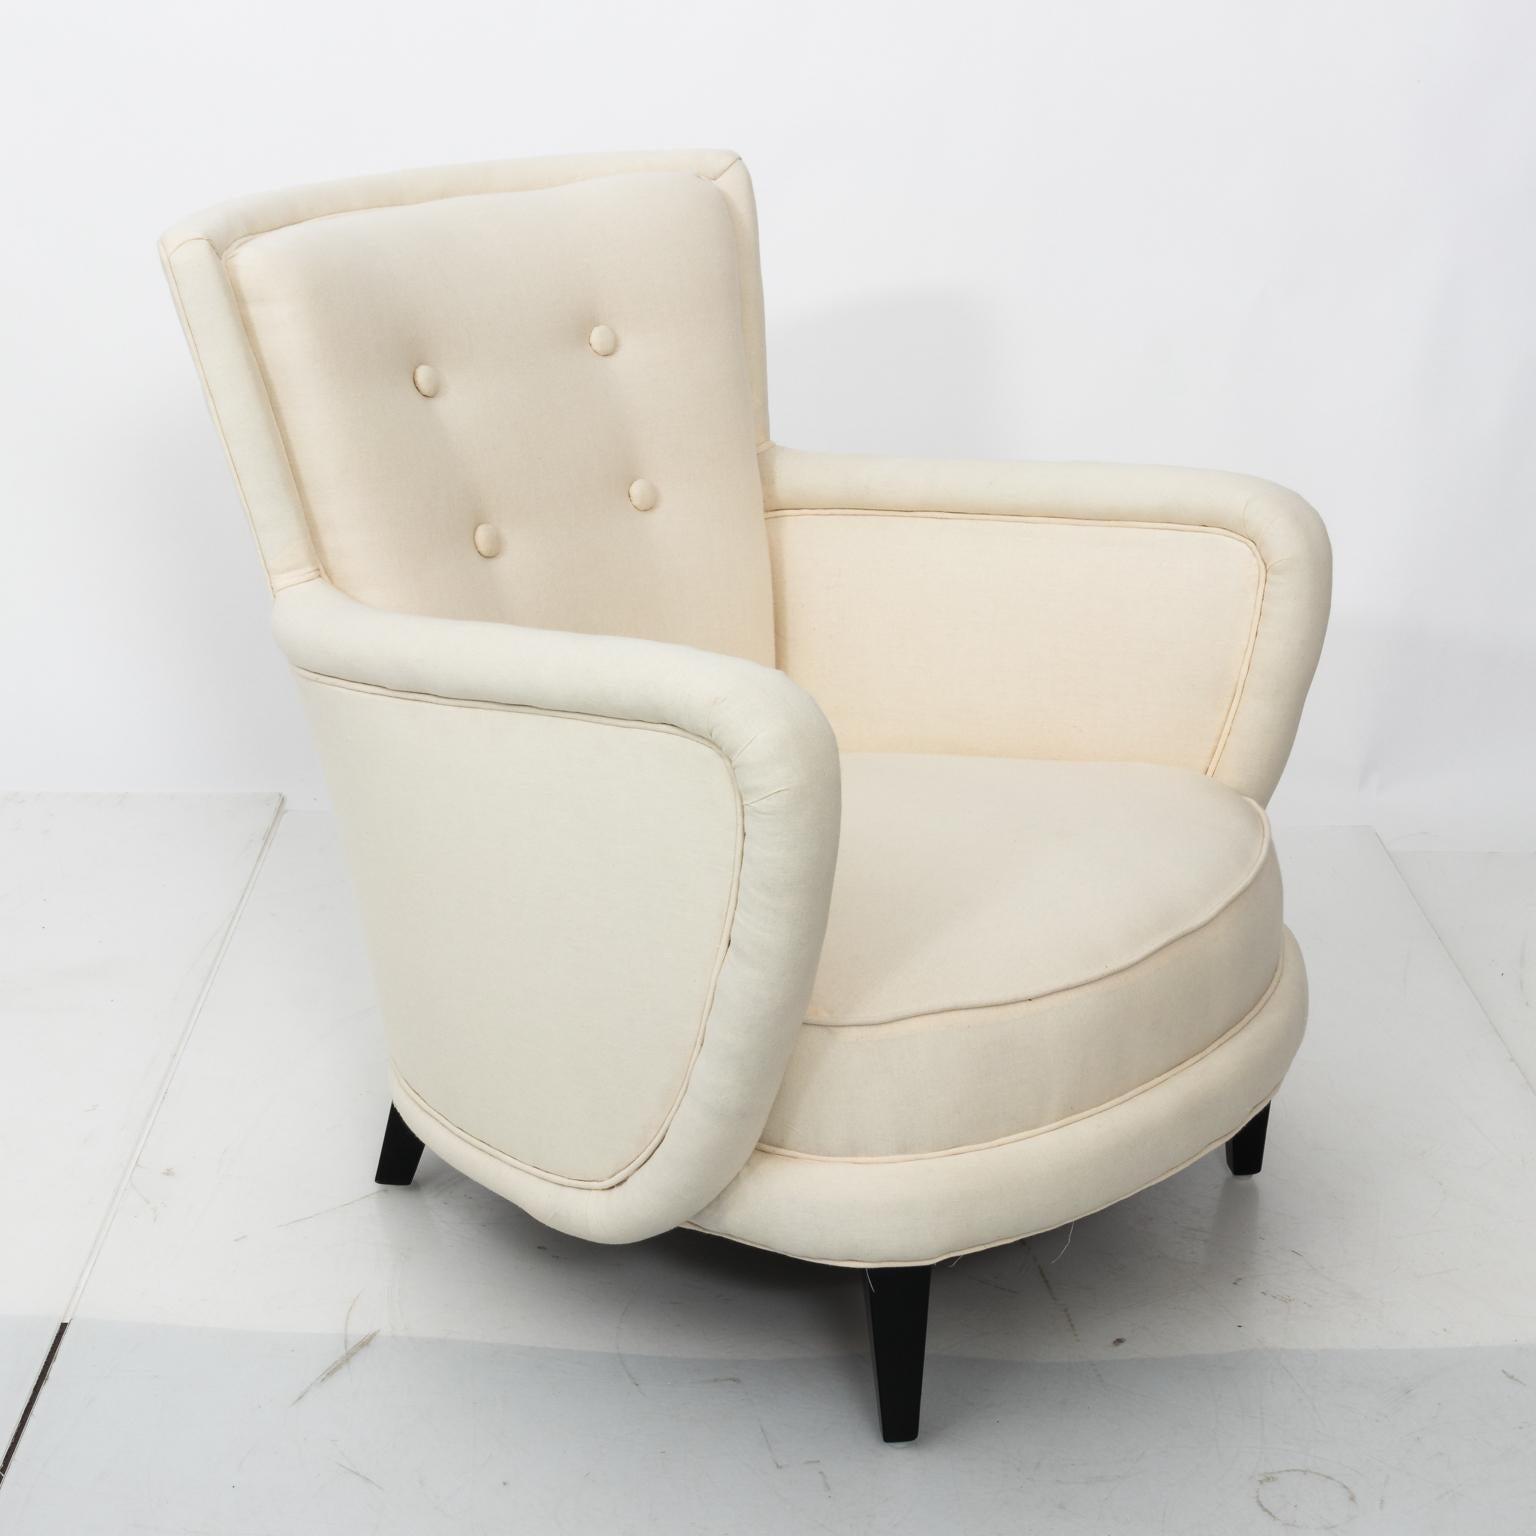 Tufted Mid-Century Modern Club Chairs 1